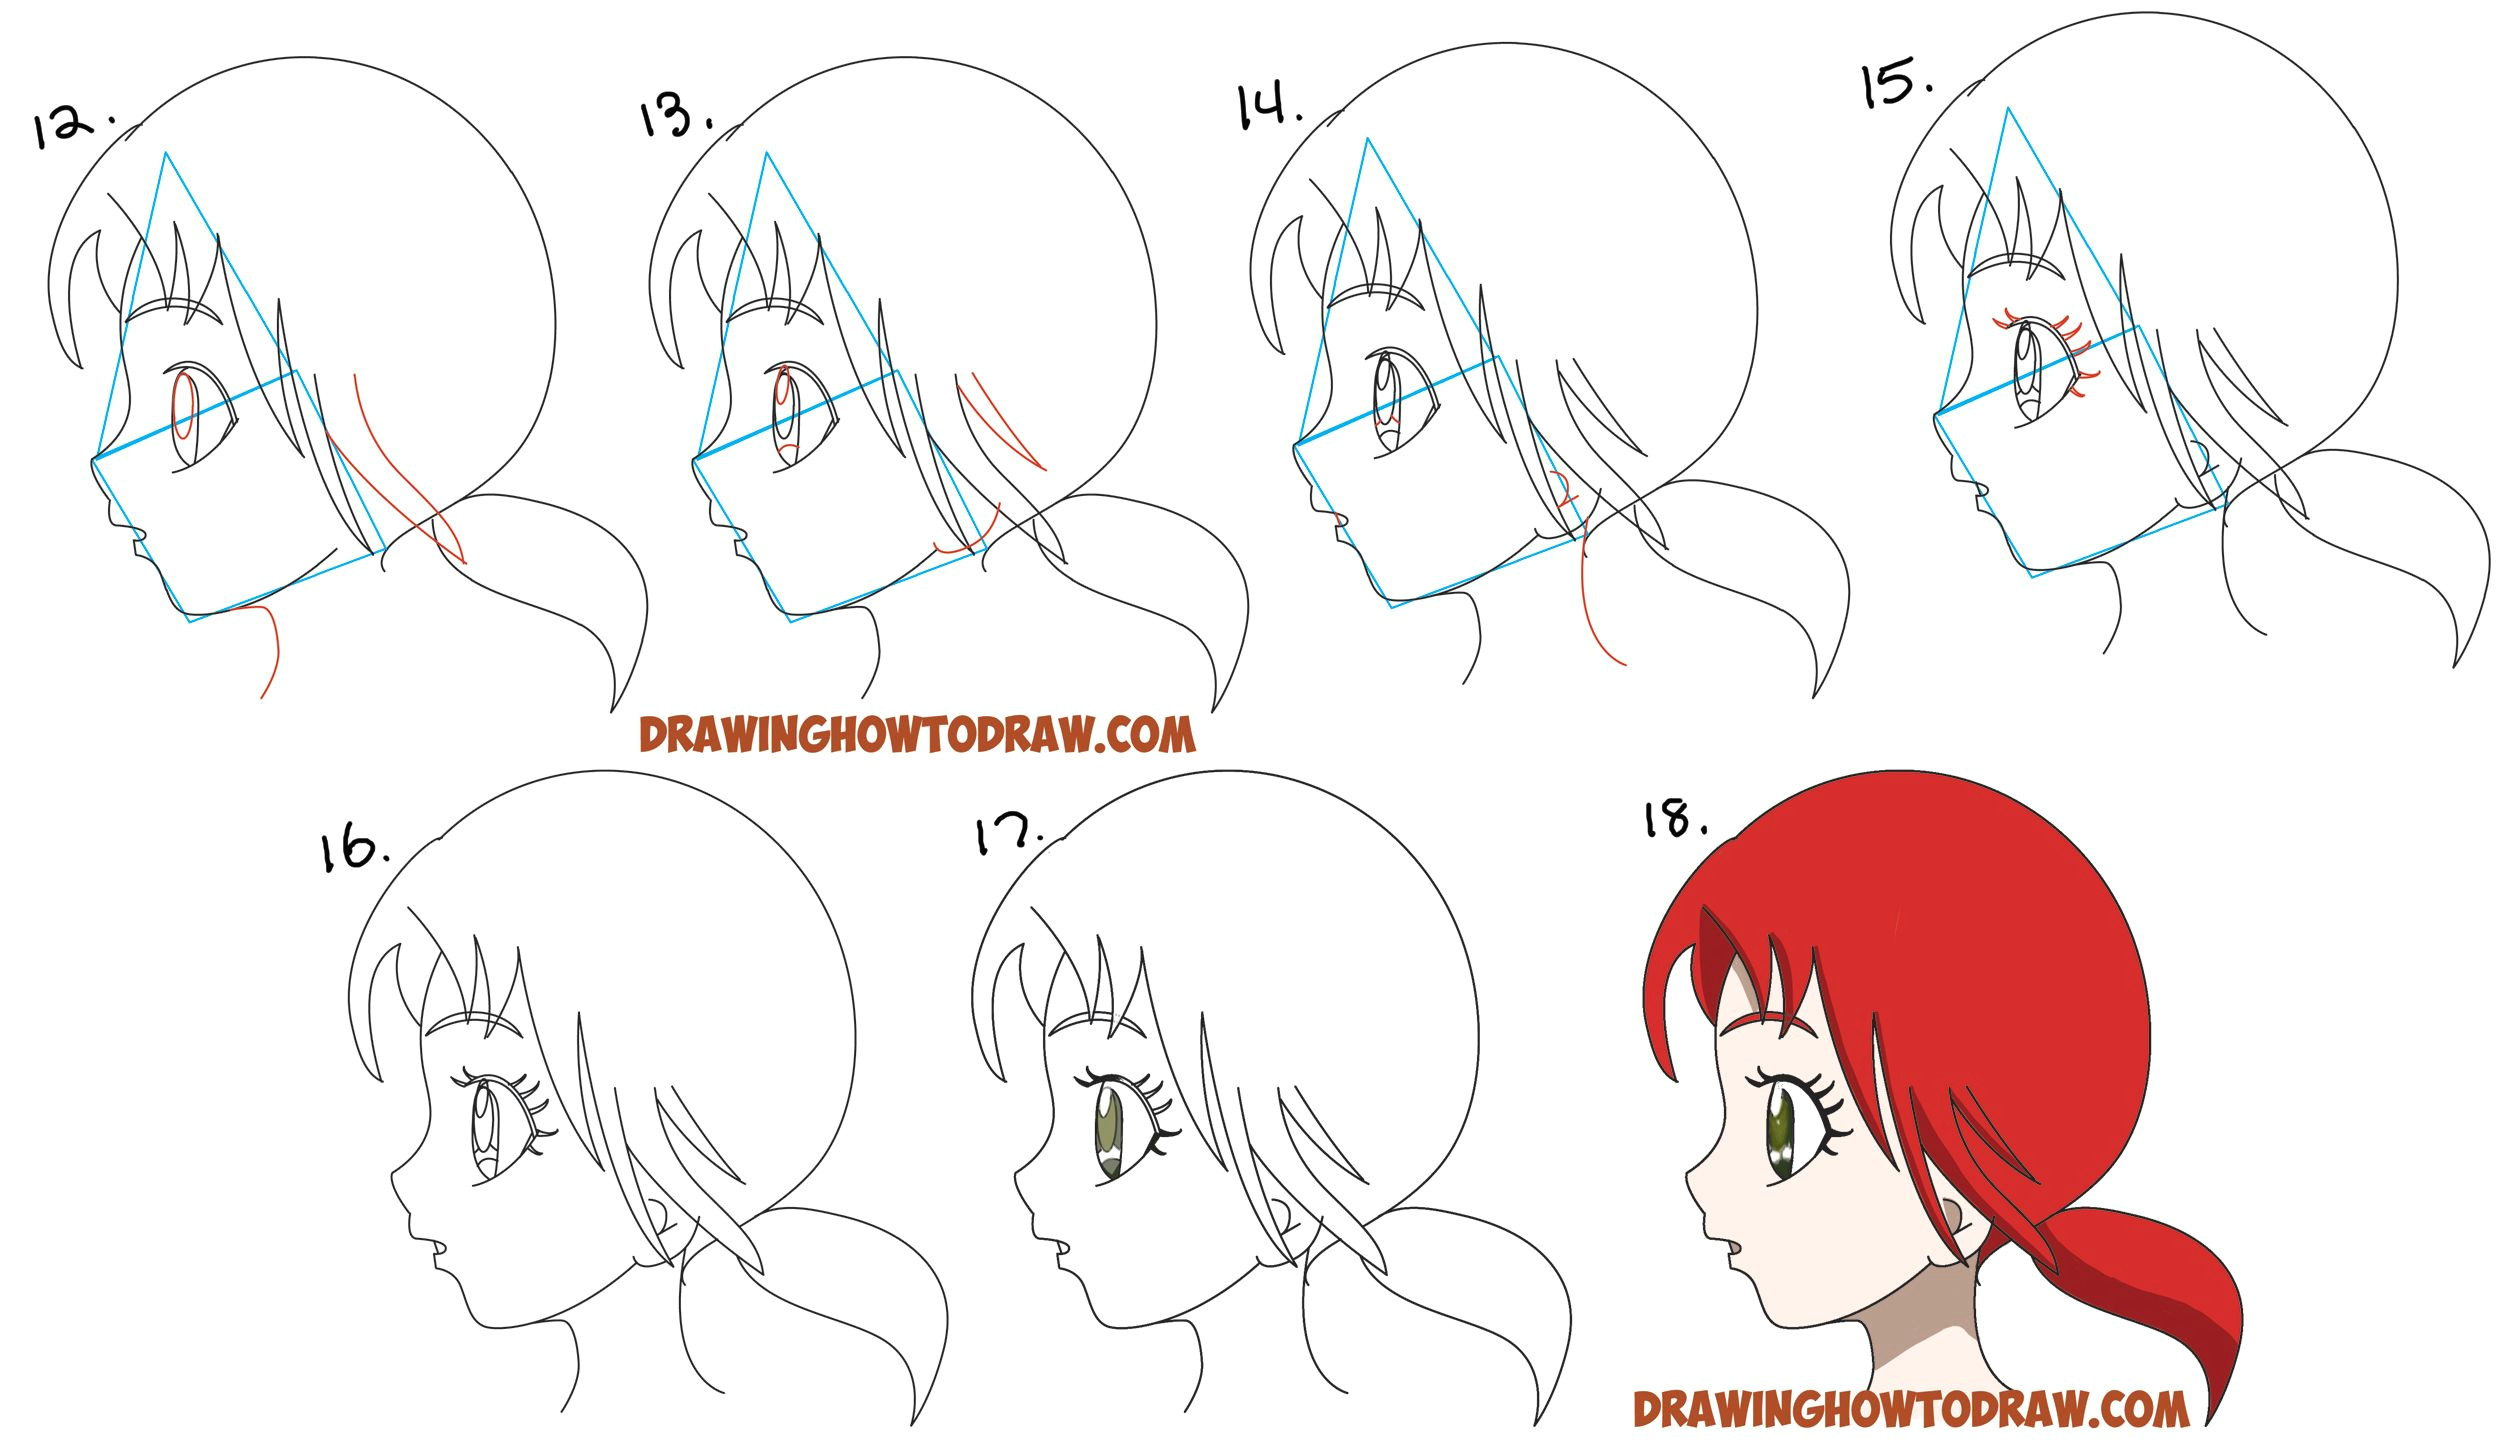 learn how to draw an anime manga girl s face and eyes from the side in profile view simple steps drawing lesson for beginners